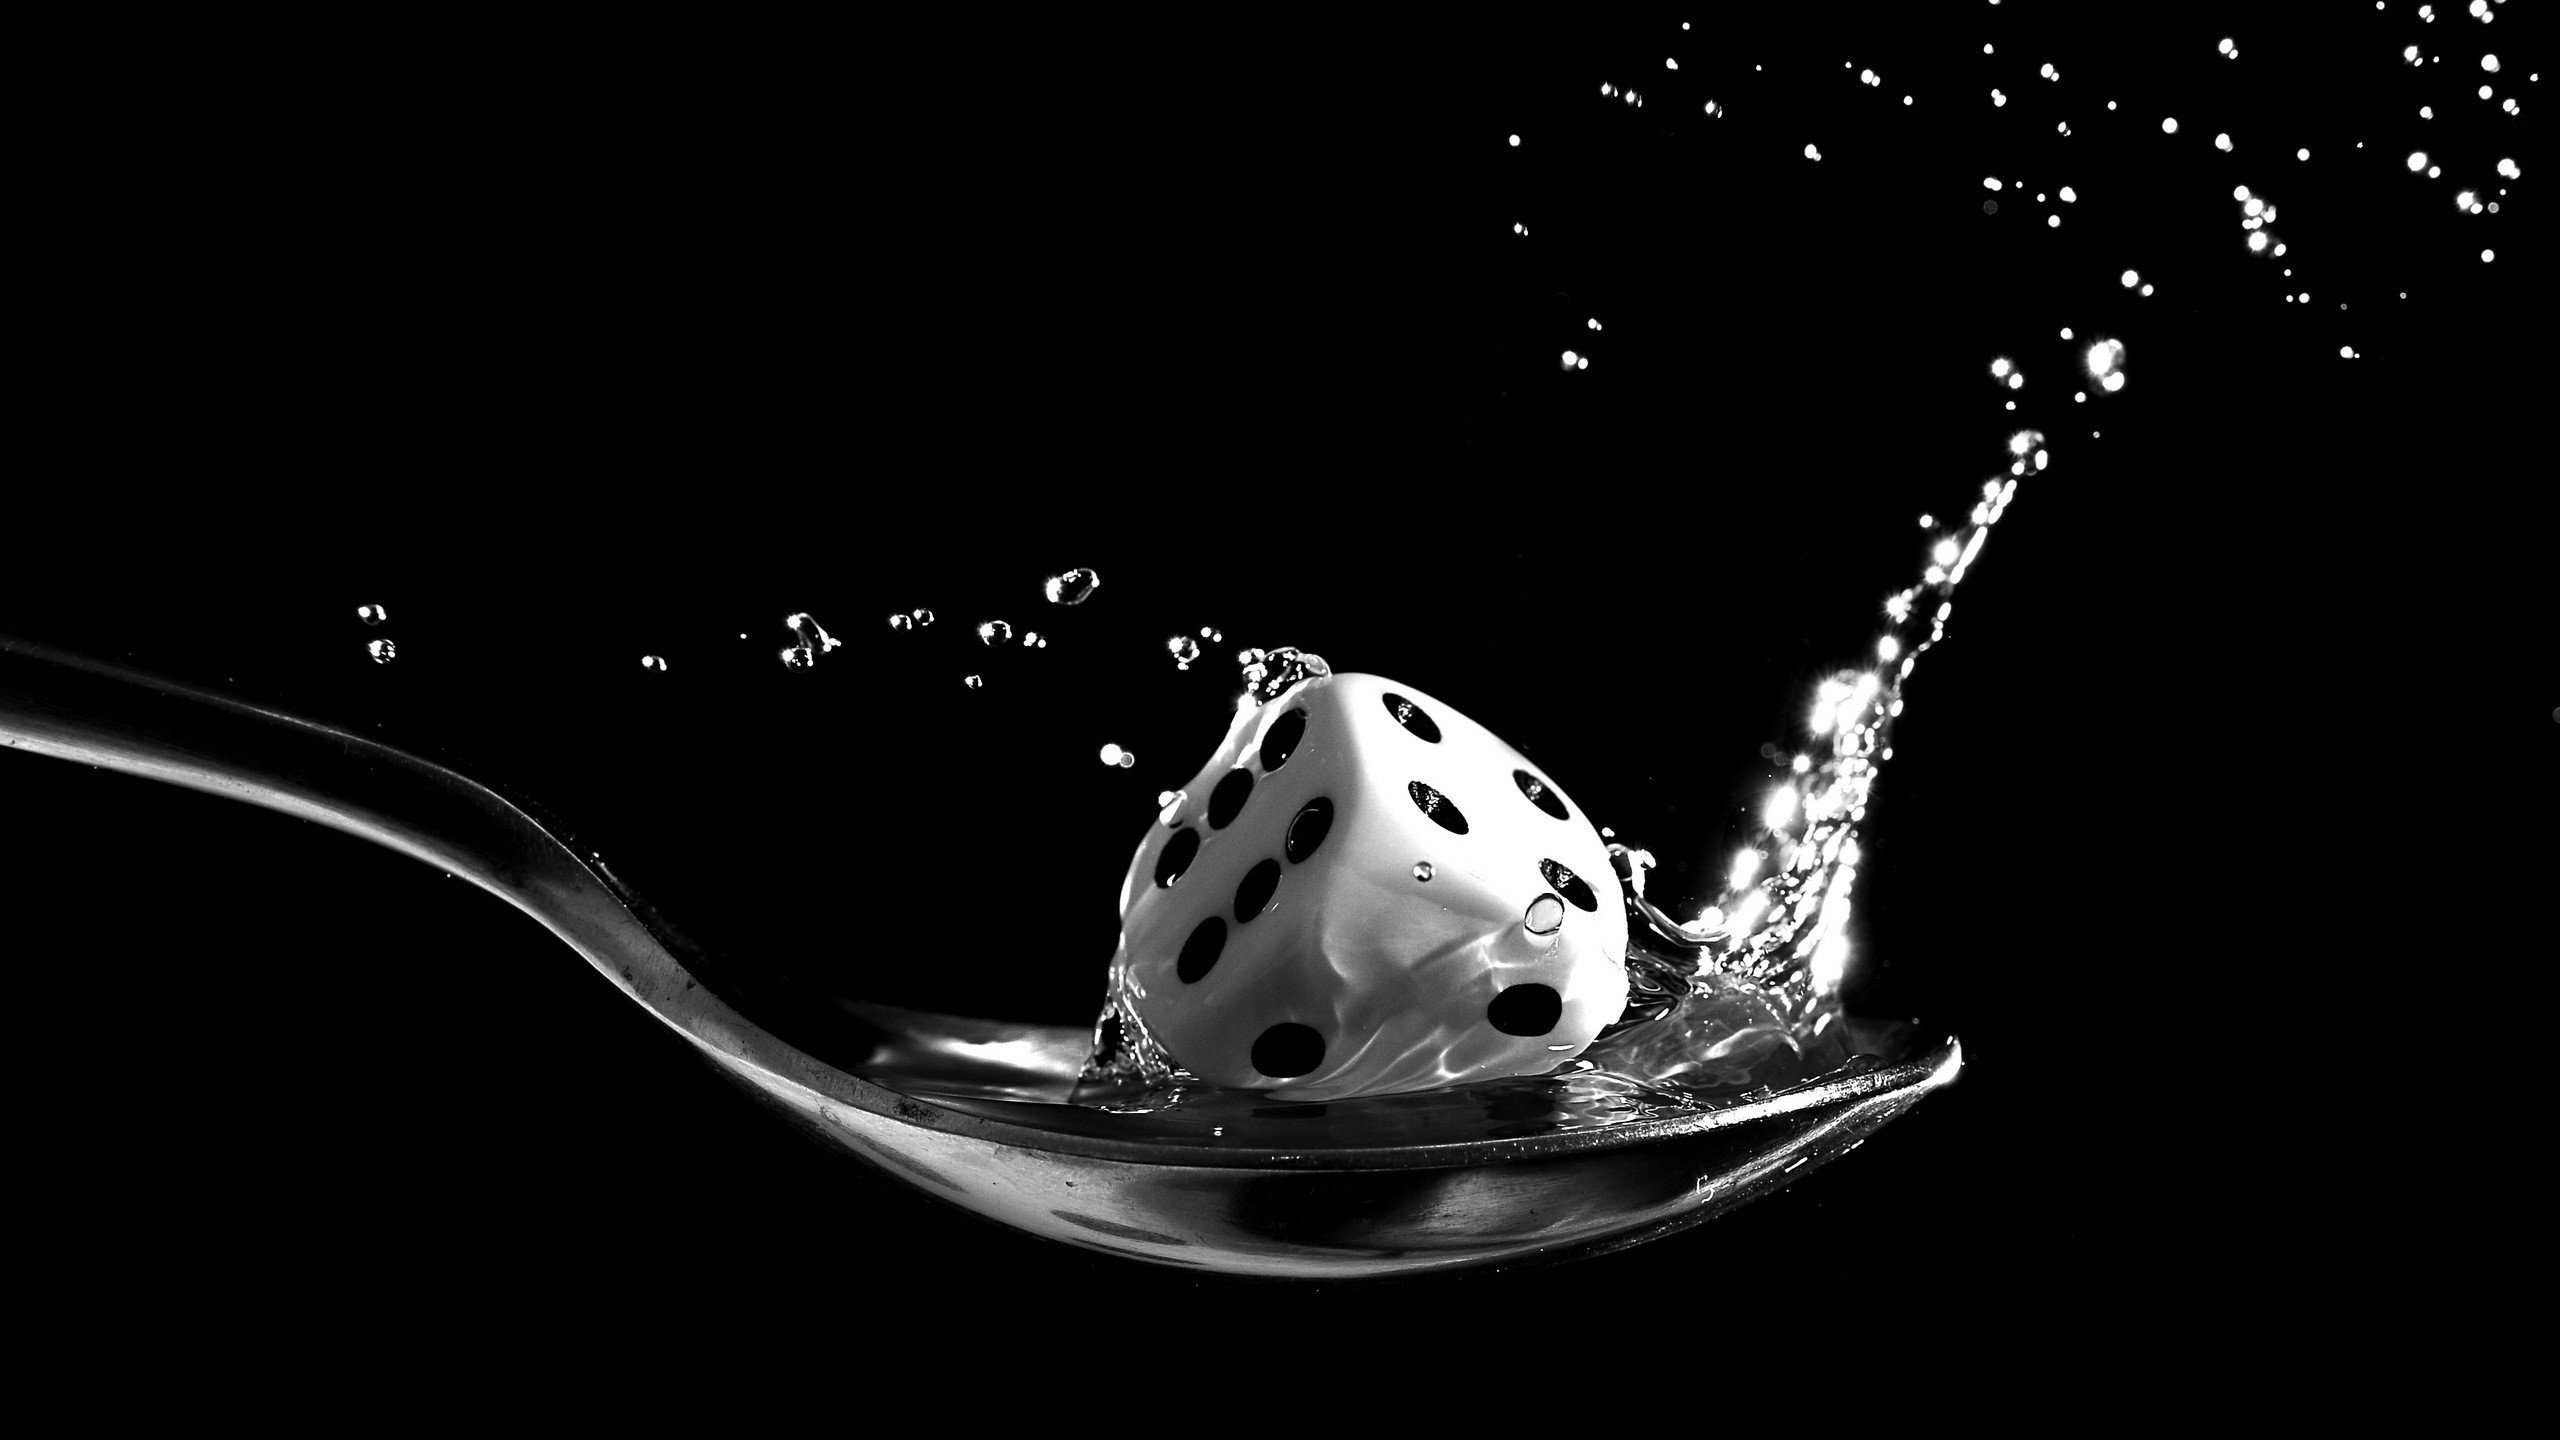 spoons, Dice, Cube, Dots, Splashes, Water, Water drops, Black background, Closeup, Monochrome Wallpaper